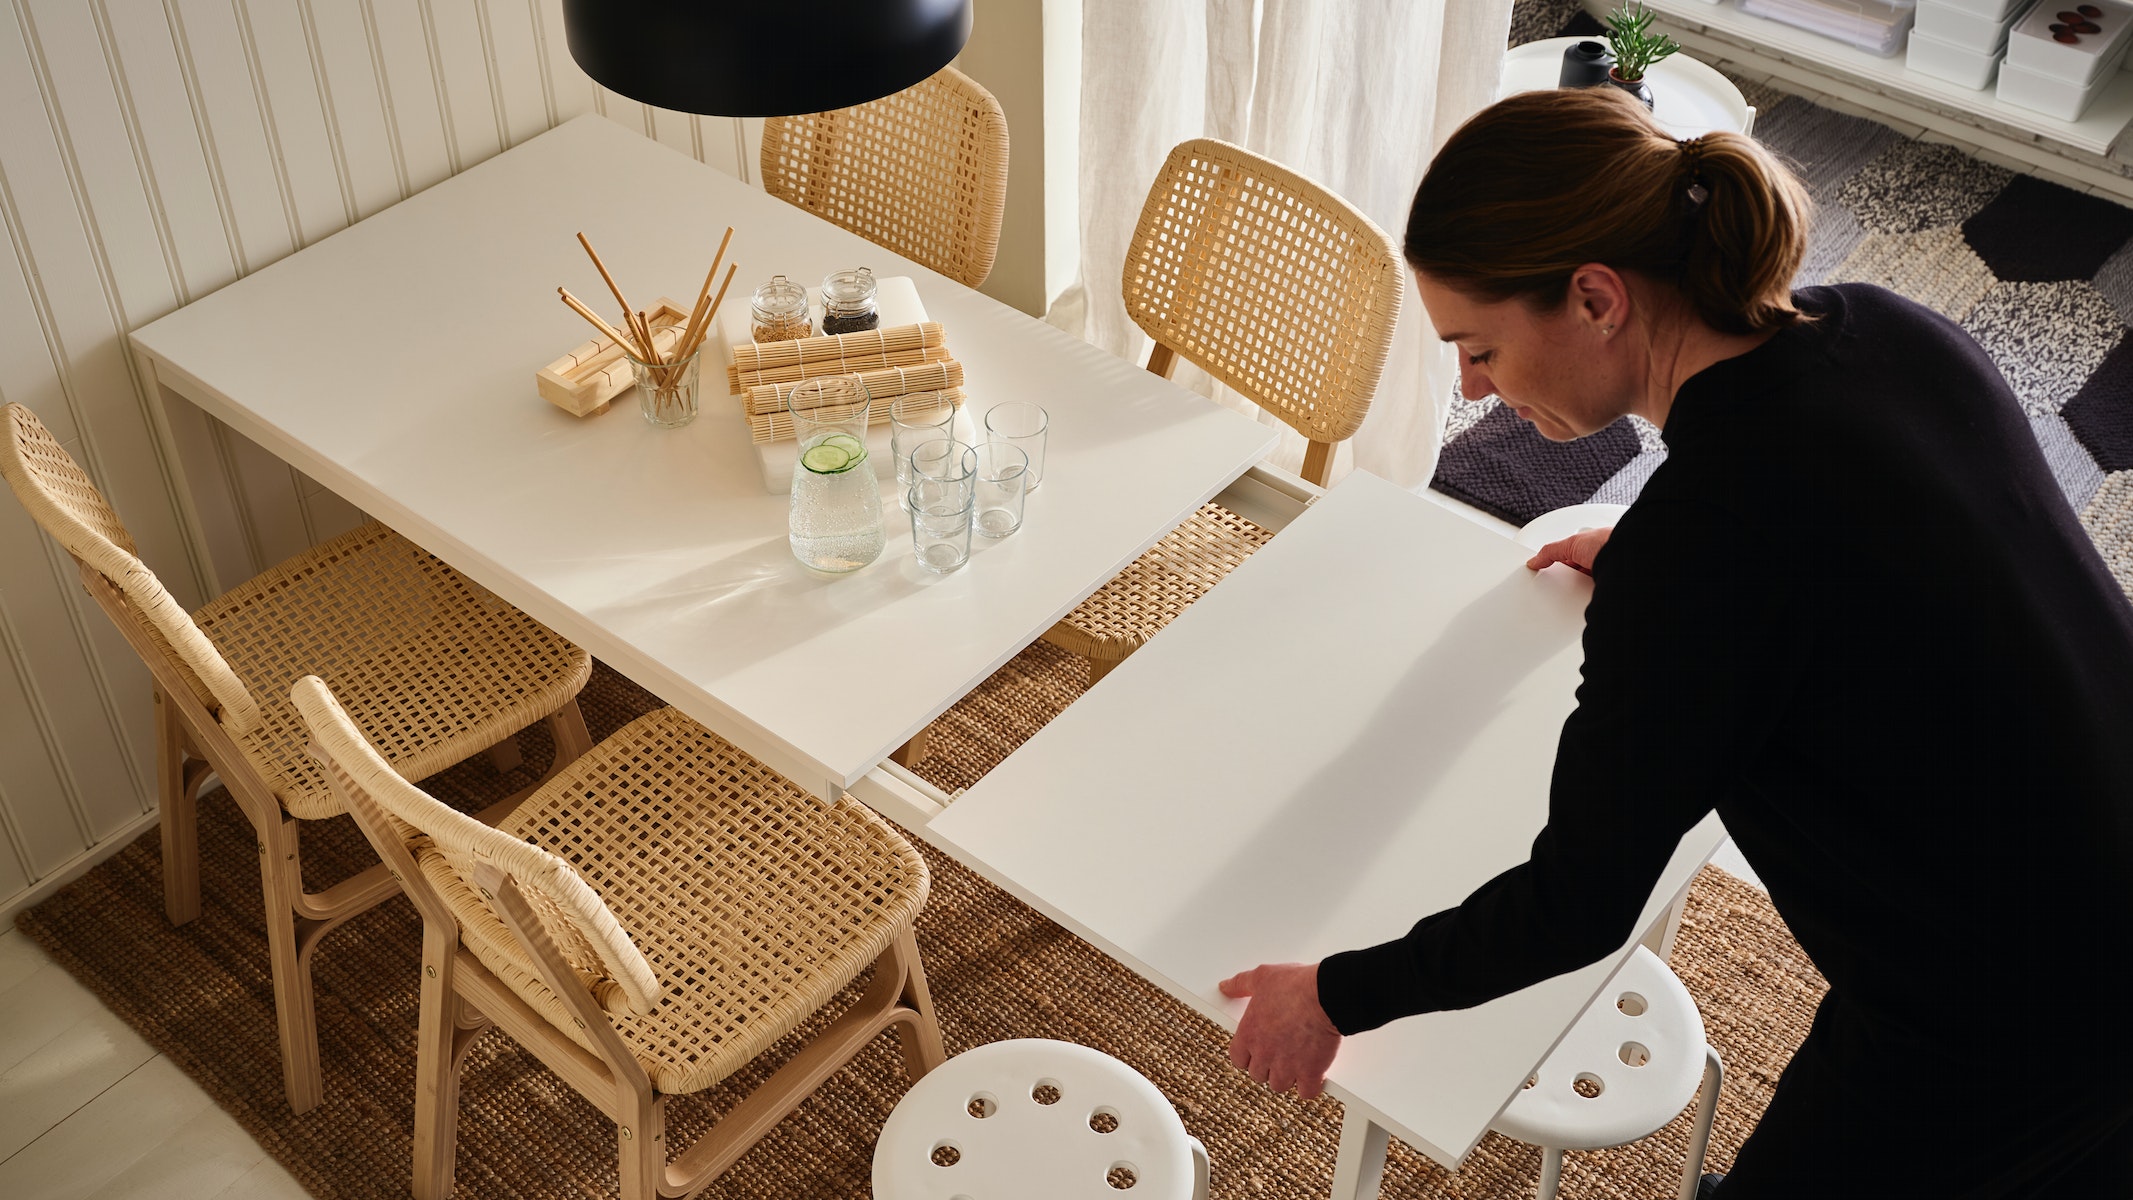 IKEA - Small space ideas for extending the dining table